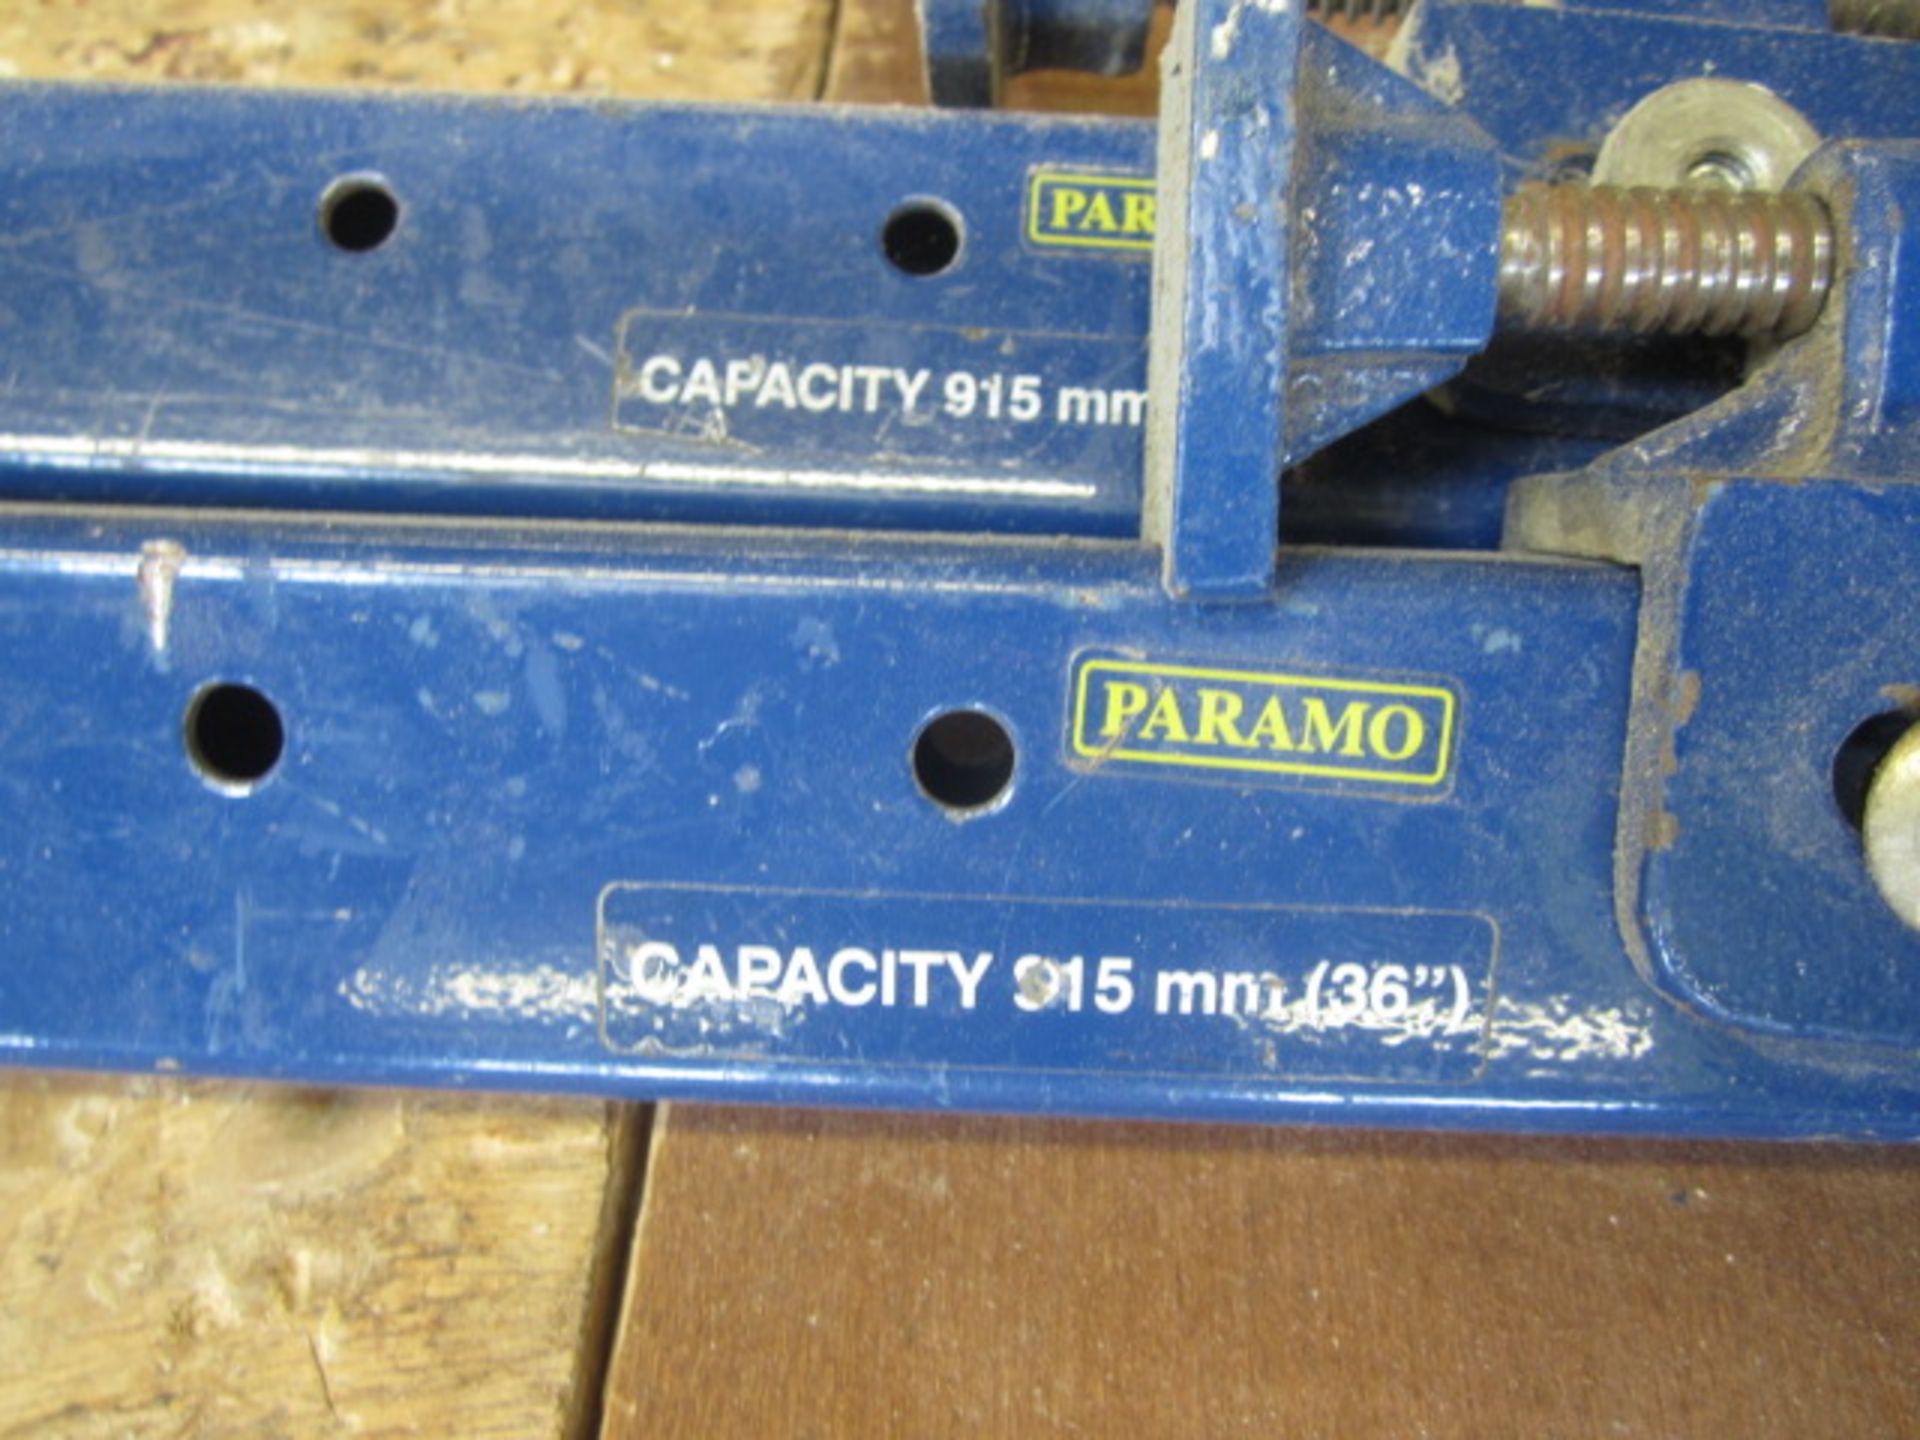 2 x Paramo slide clamps - Image 2 of 2